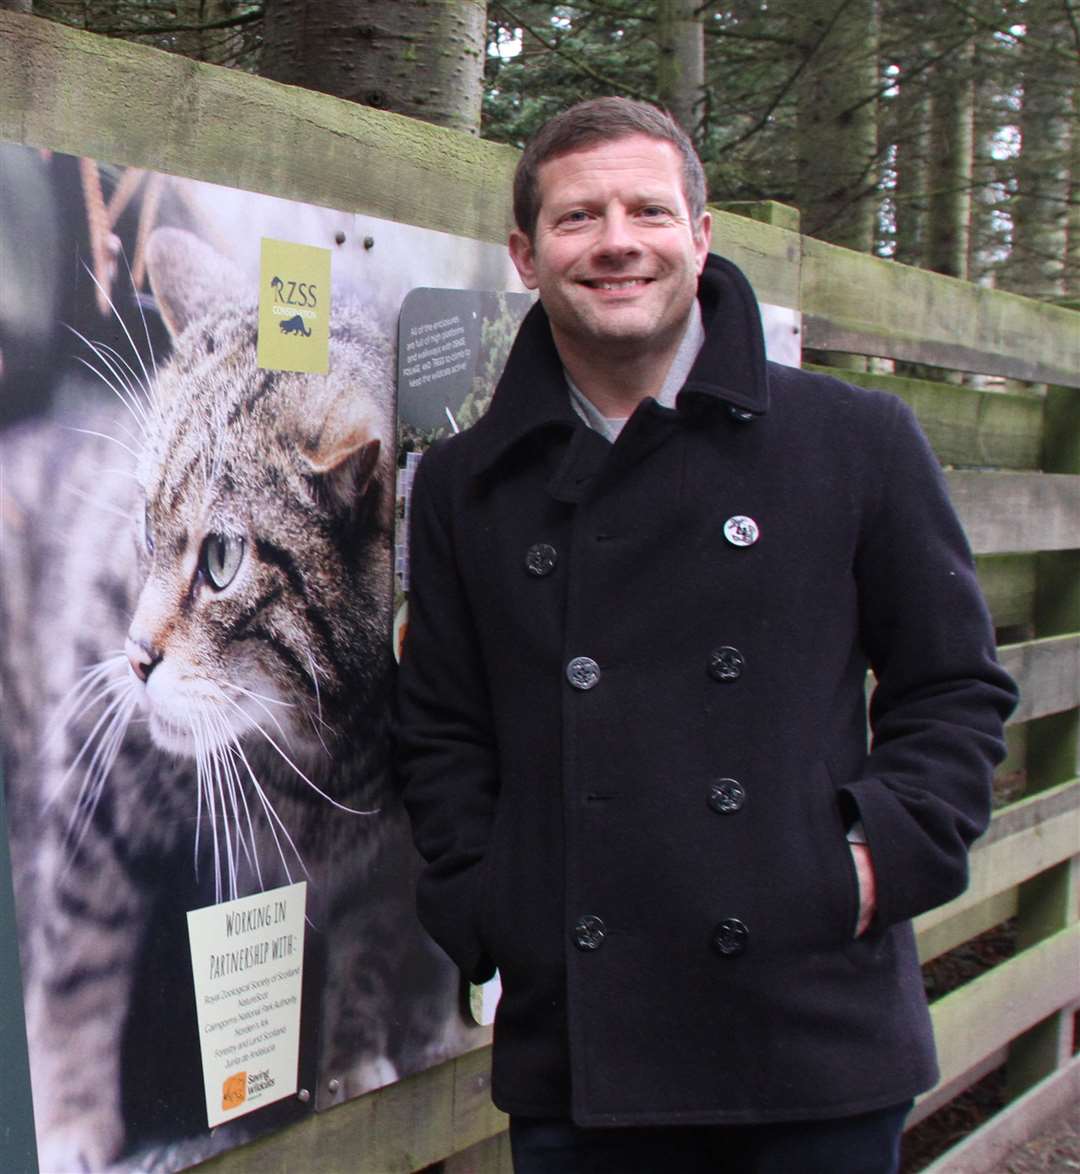 Popular TV star Dermot O'Leary visited the Highland Wildlife Park yesterday to promote reading and writing, and the survival of the wildcat.